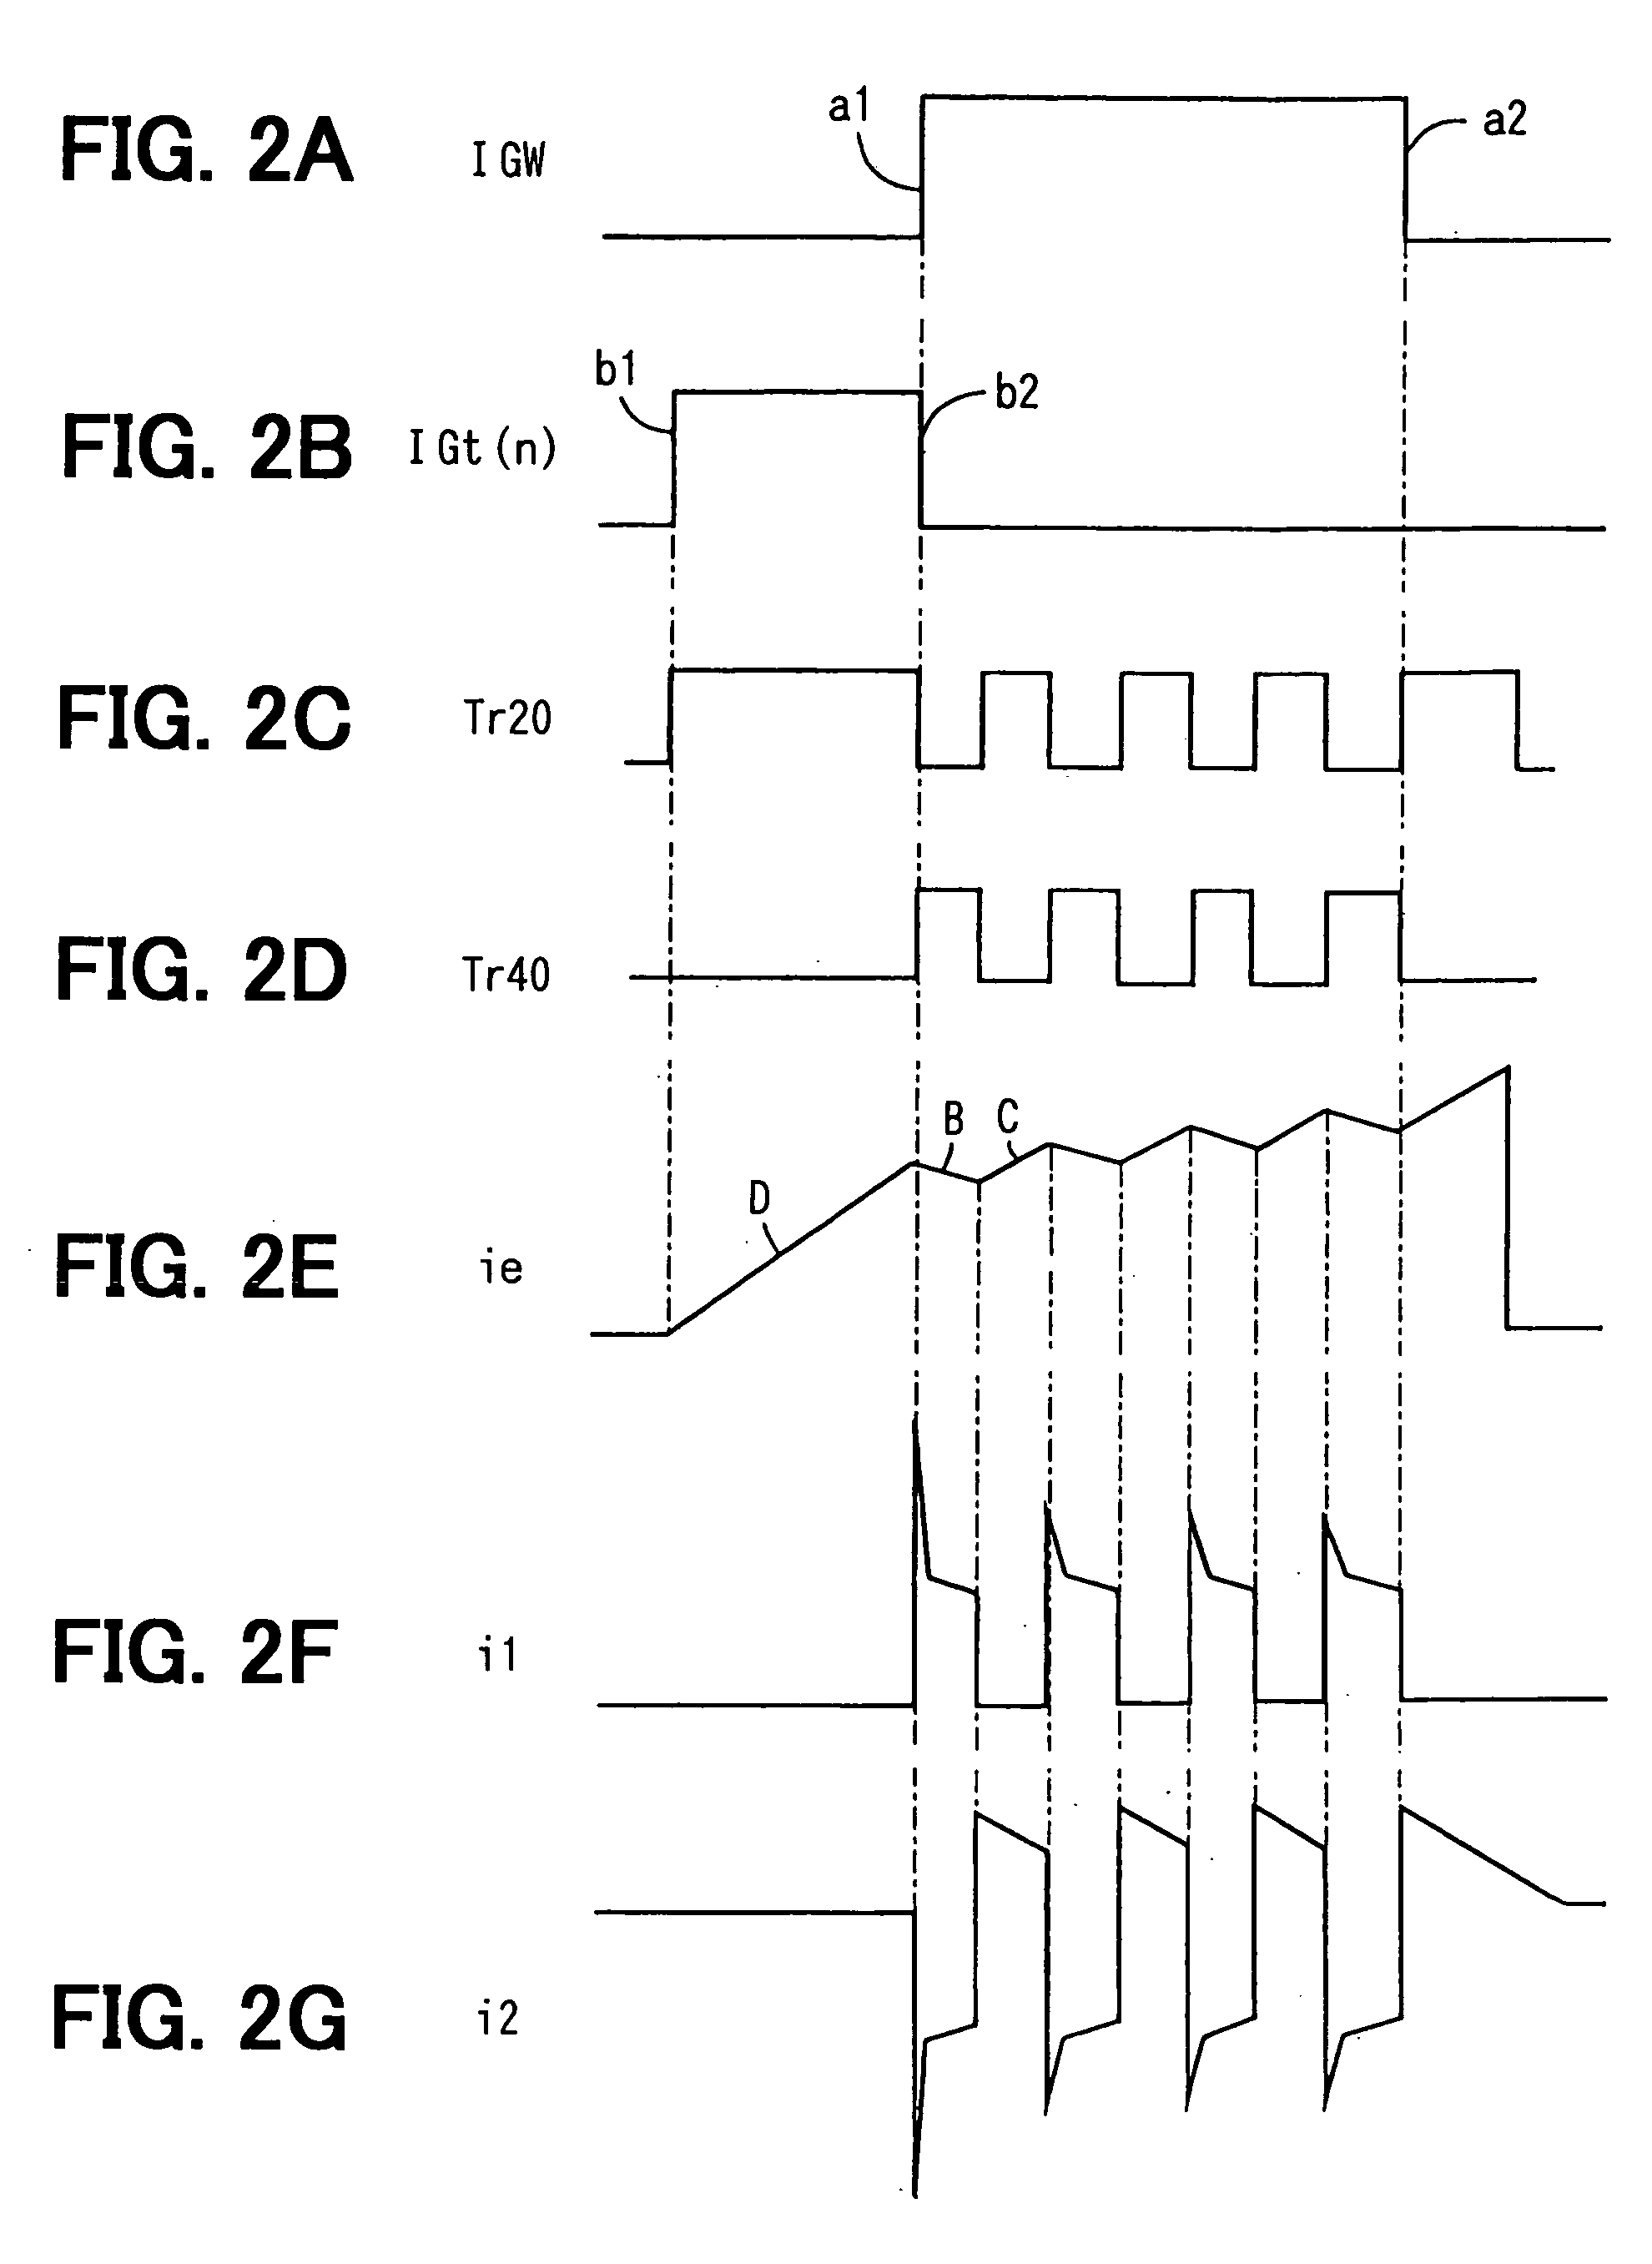 Multi-spark type ignition system